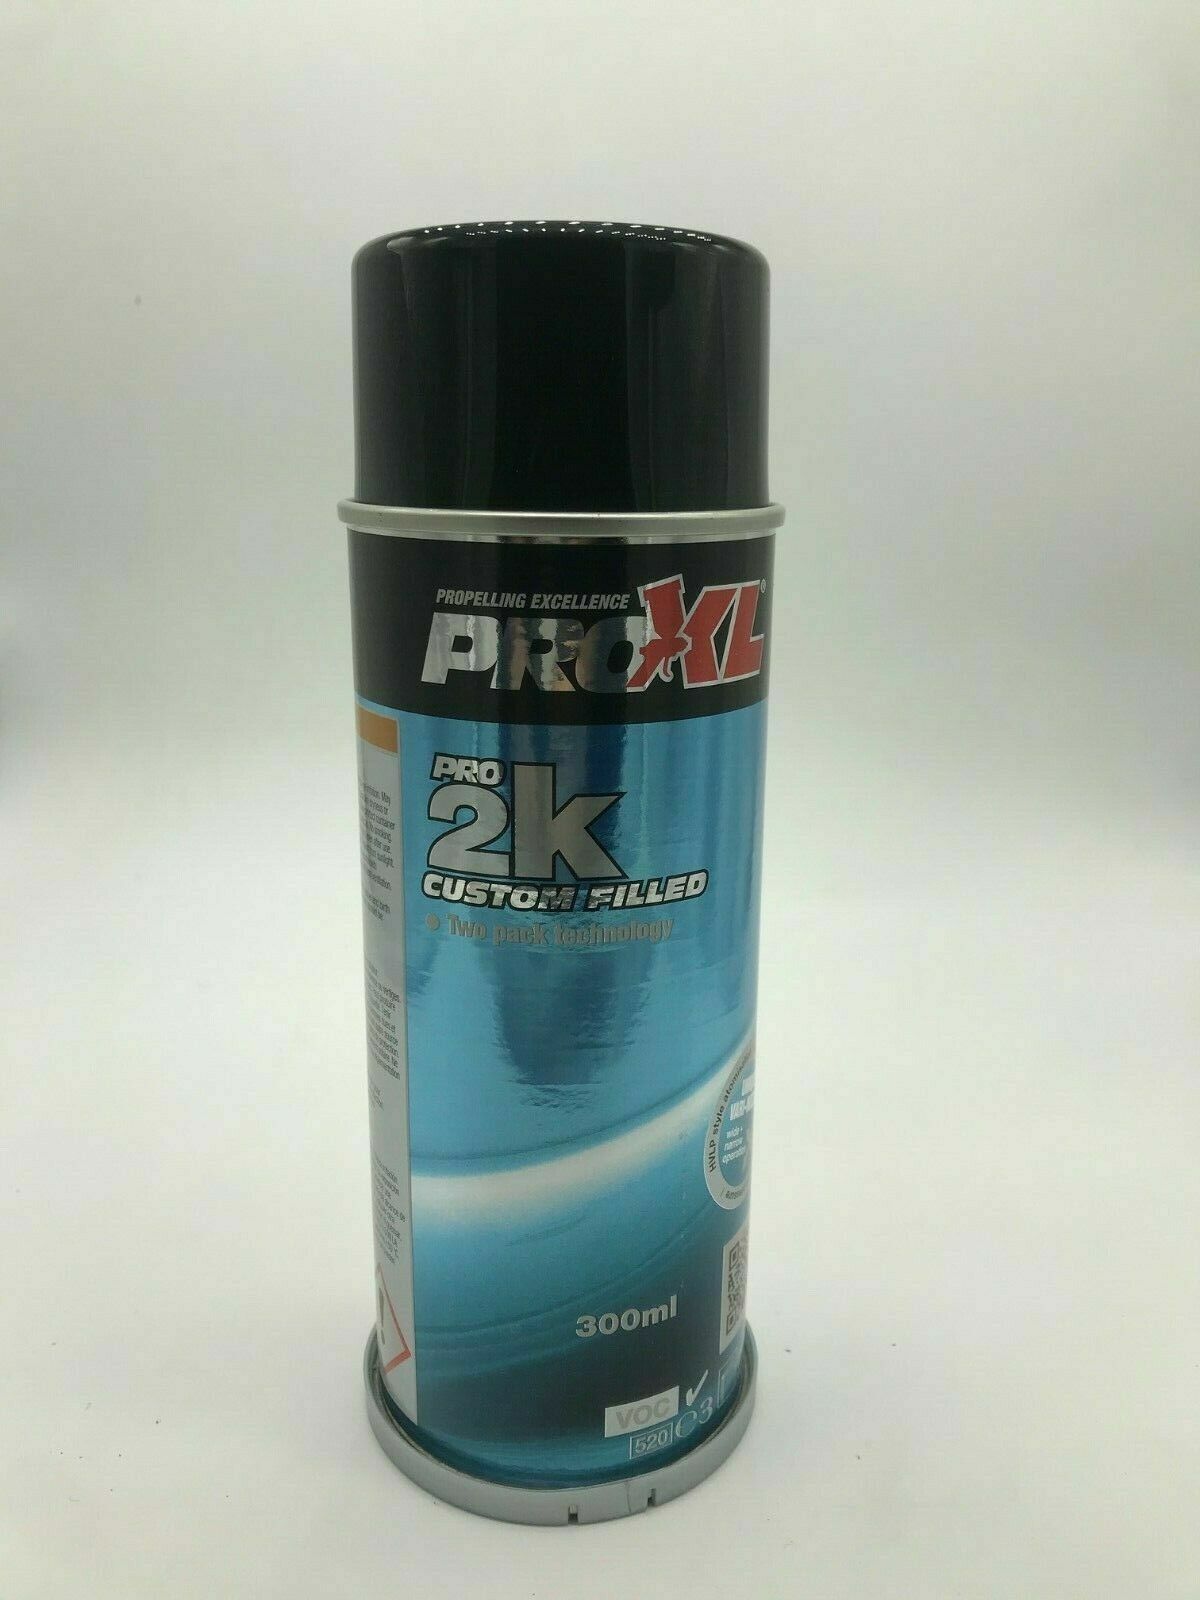 High gloss white 2k Activated  HS Aerosol Paint